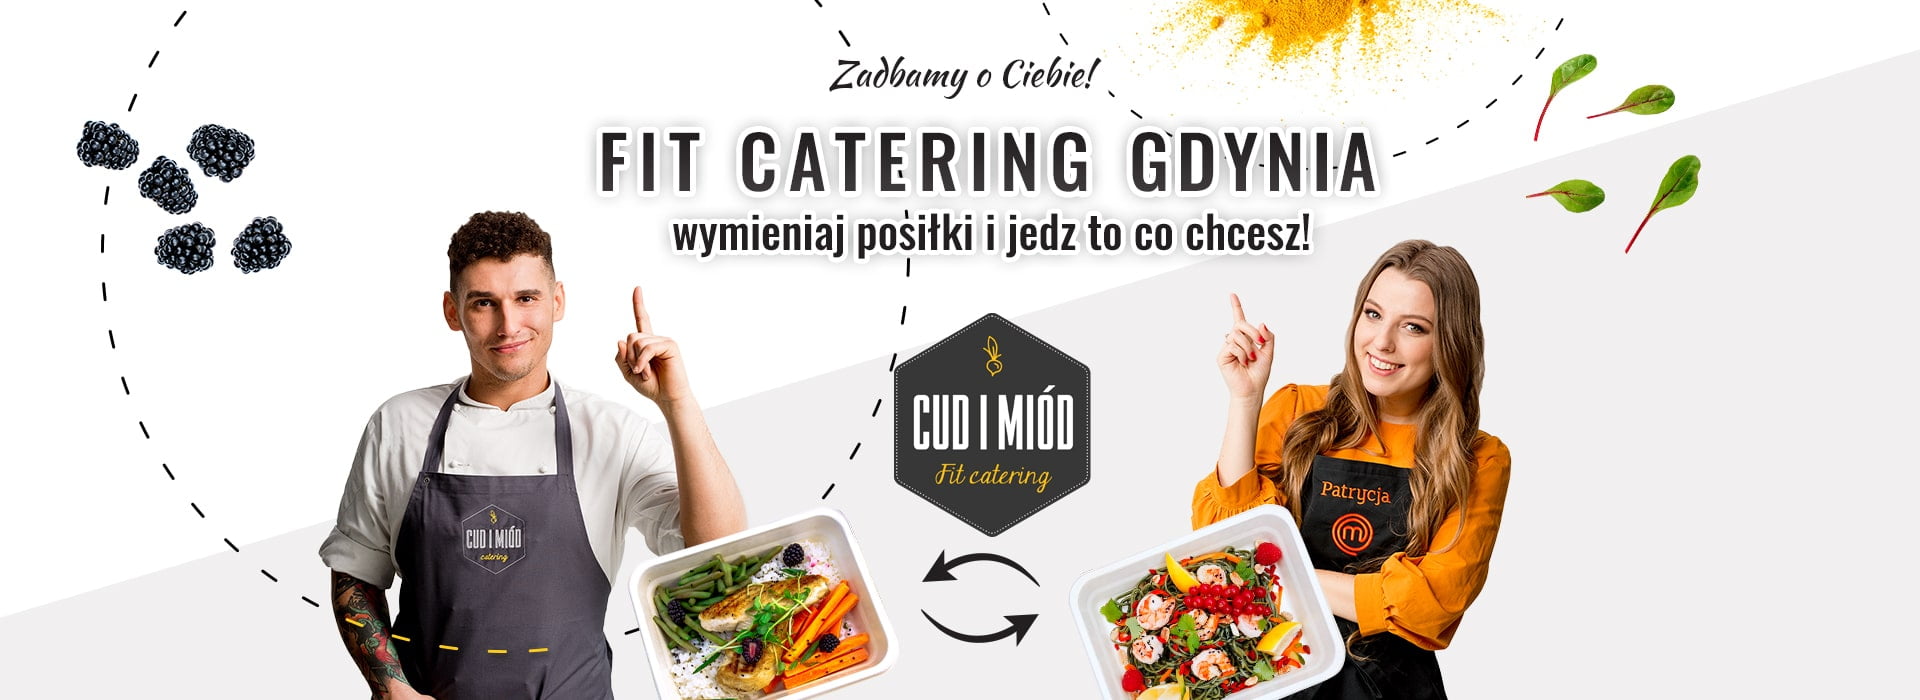 Catering-gdynia